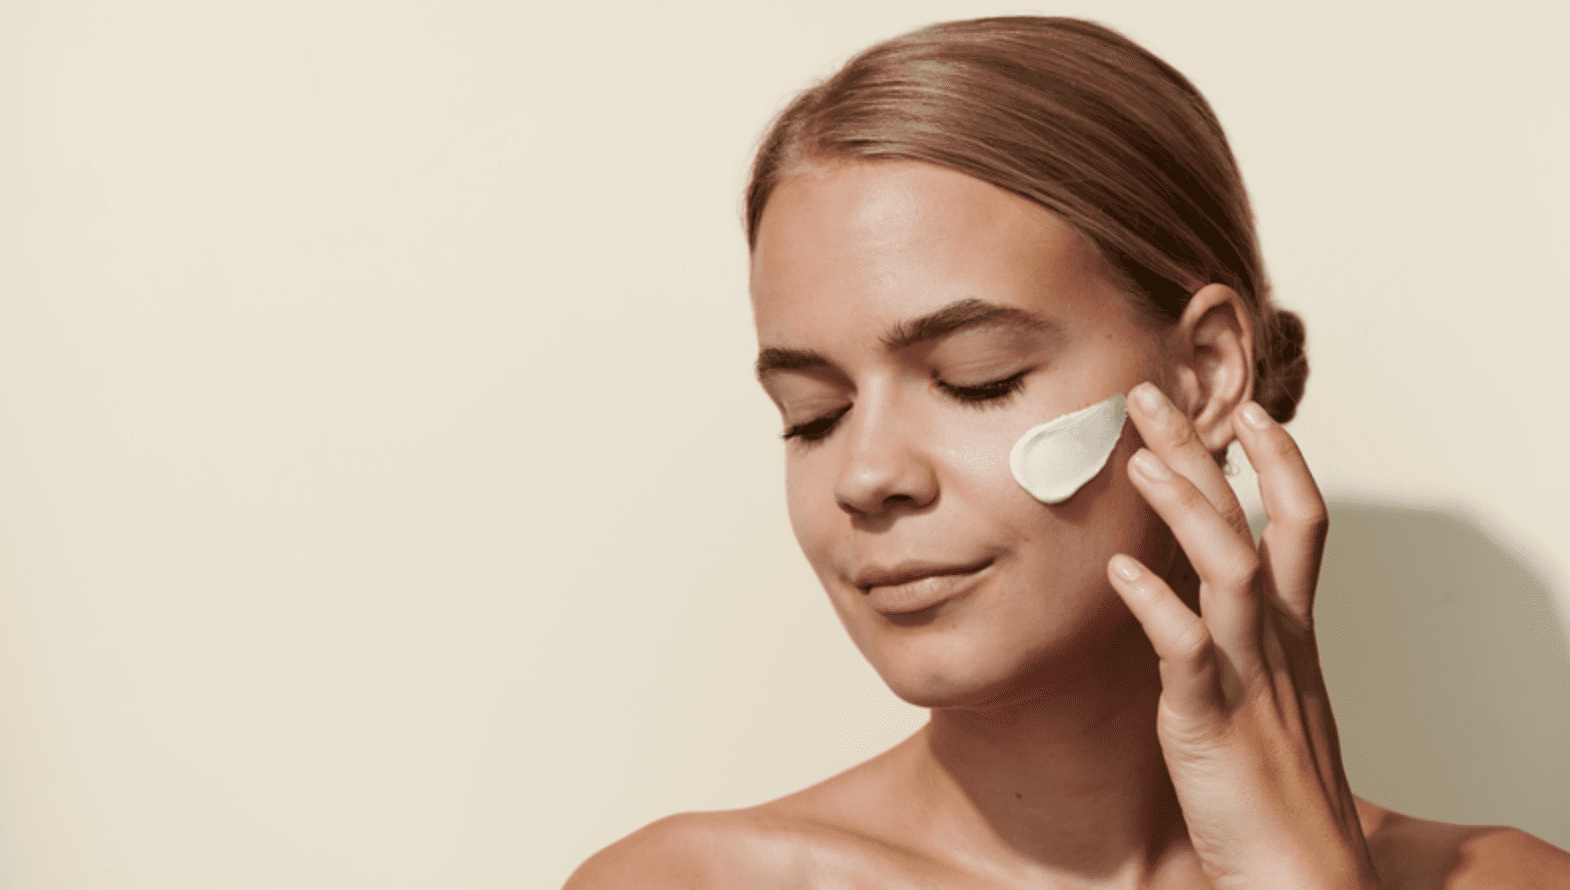 Don’t Believe These SPF Myths: Why Sunscreen Is Important